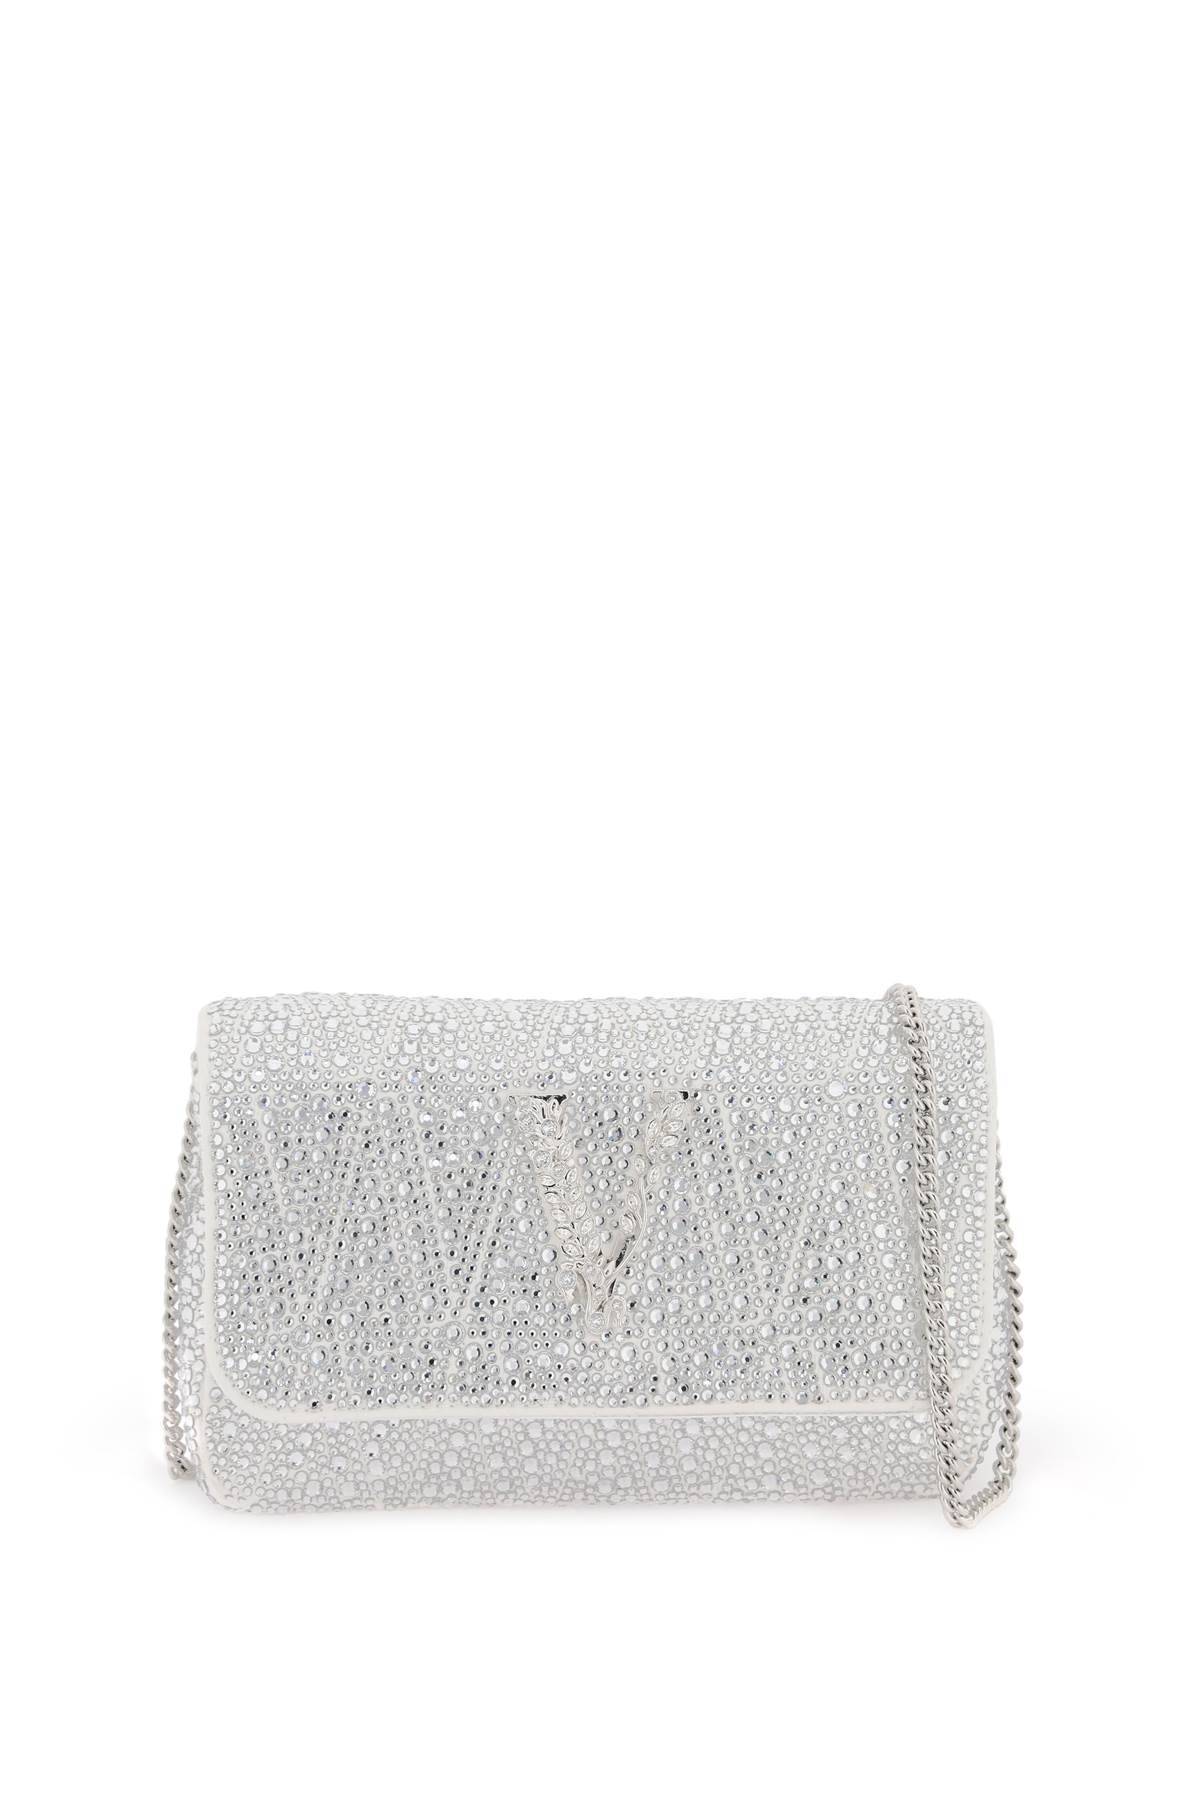 Shop Versace Virtus Mini Bag With Crystals In Silver